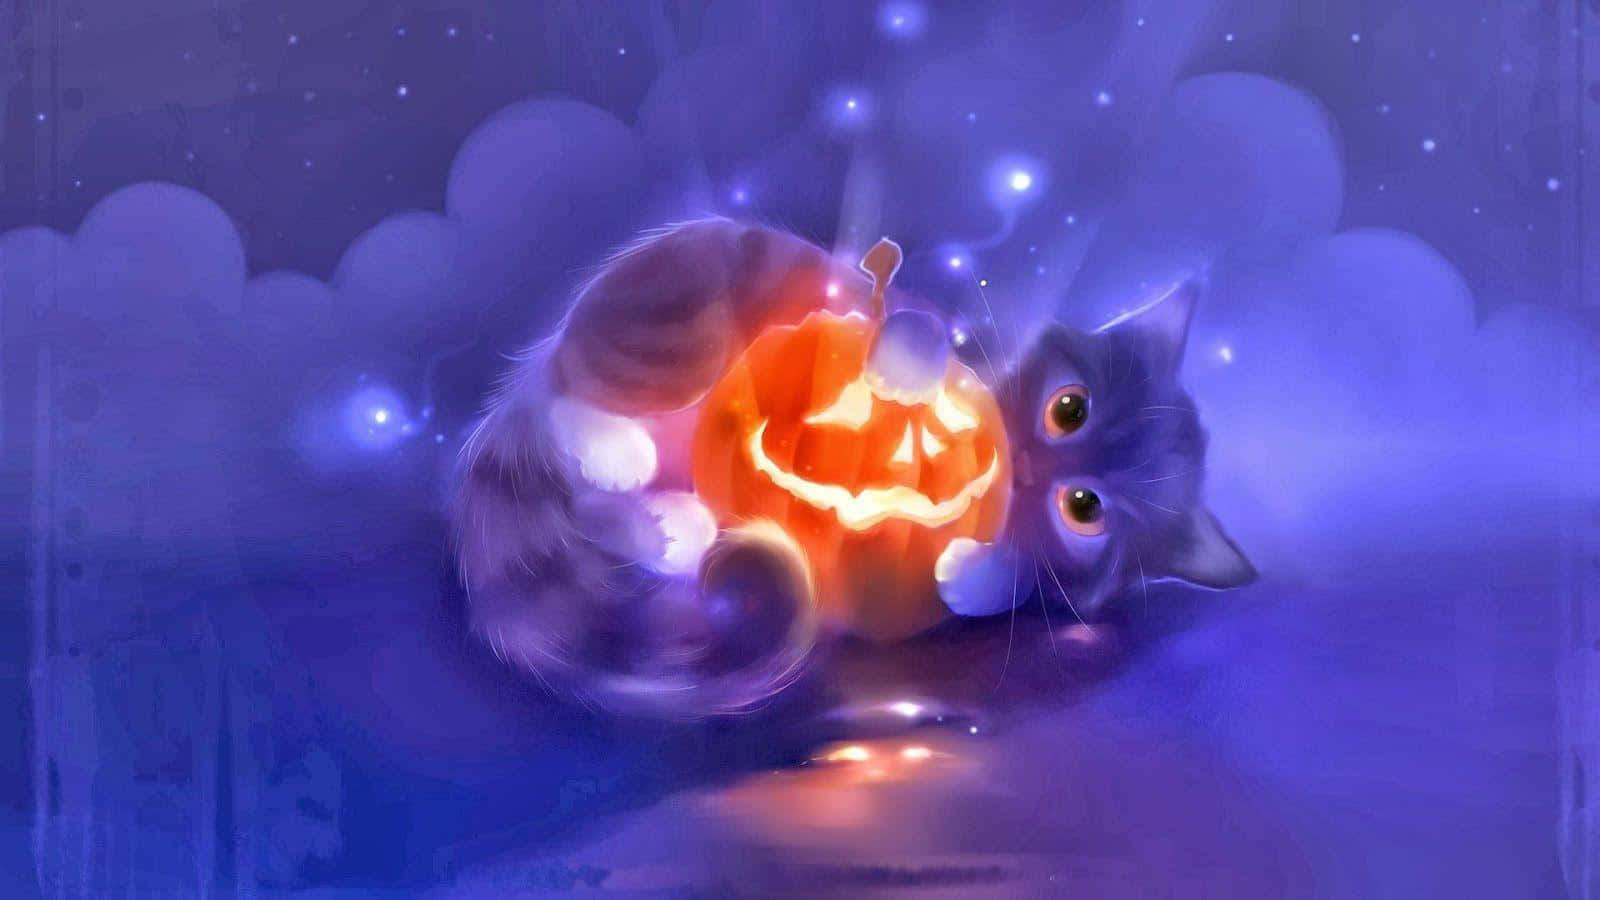 Celebrate Halloween with this playful cat!